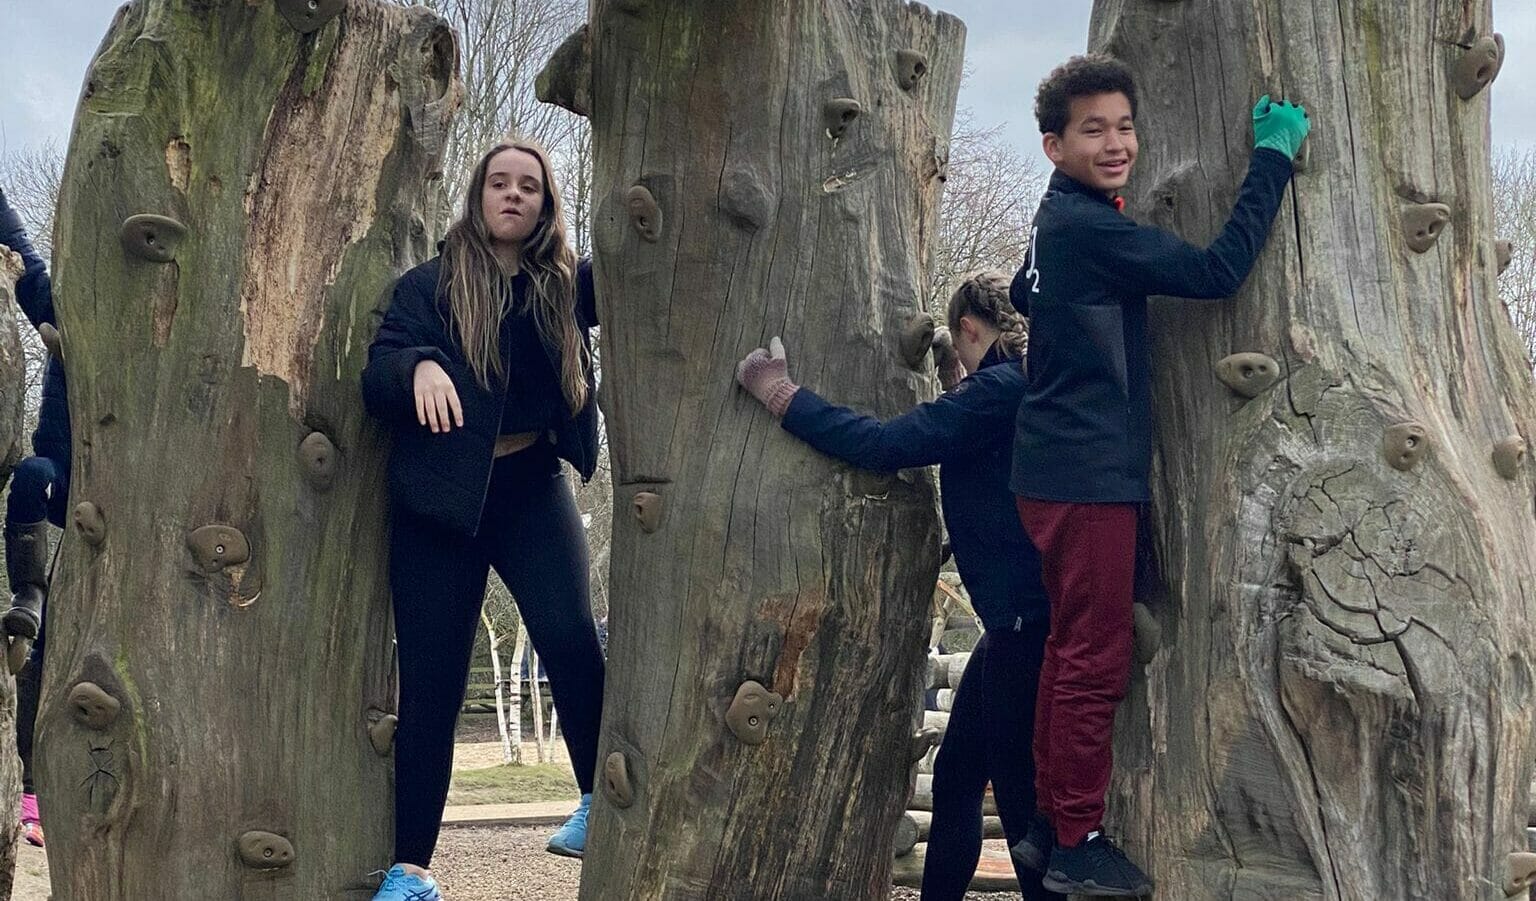 Students holding onto tree trunks